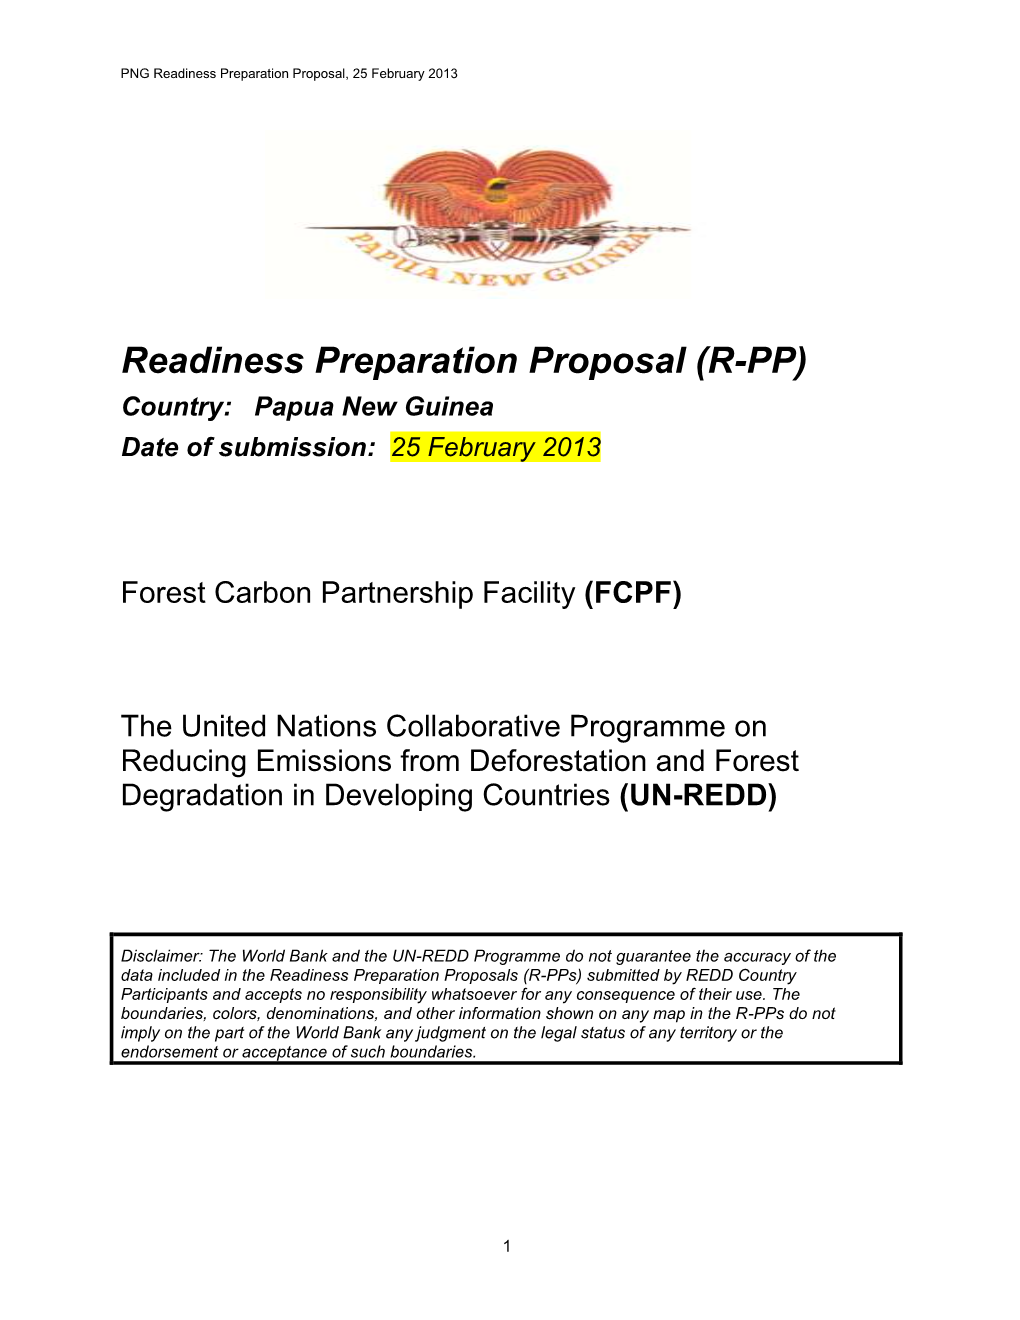 PNG R-PP Draft, August 2012